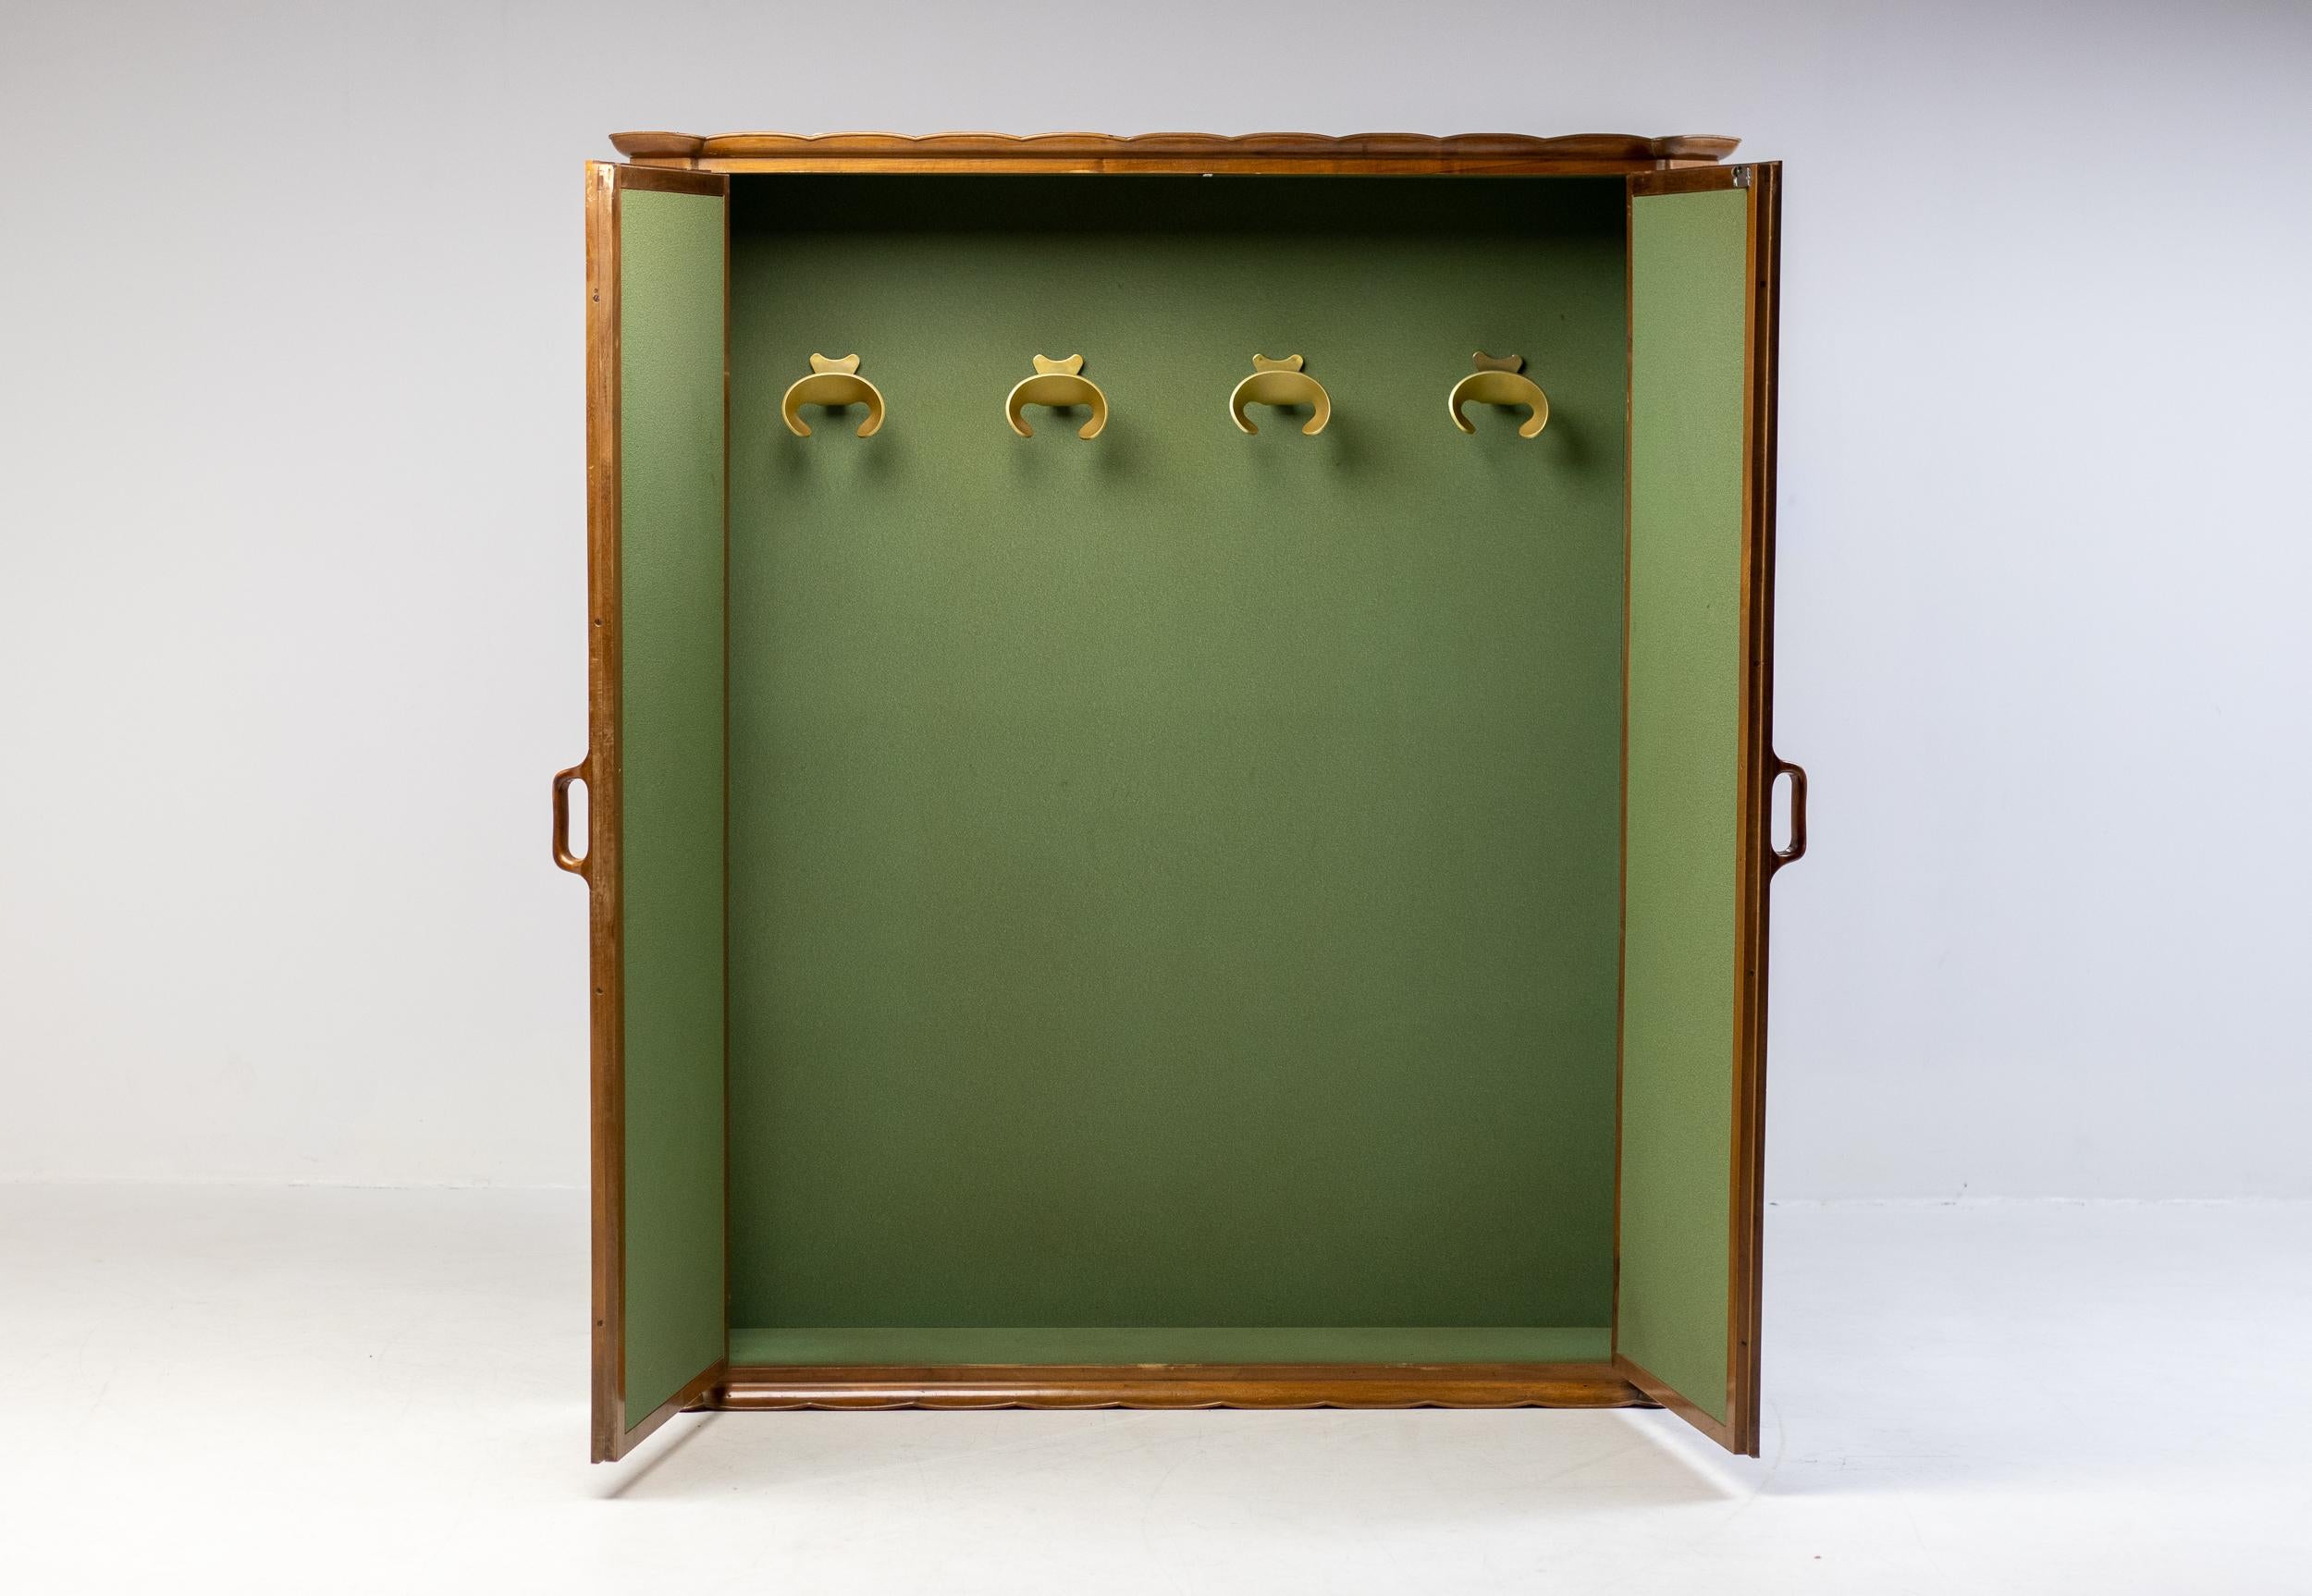 A superb Italian walnut wardobe covered with green felt on the inside, made to Measure for the villa of an Italian executive in 1960. Inside the wardrobe 4 organic design coat hangers in cast bronze are mounted to the rear panel. The wardrobe